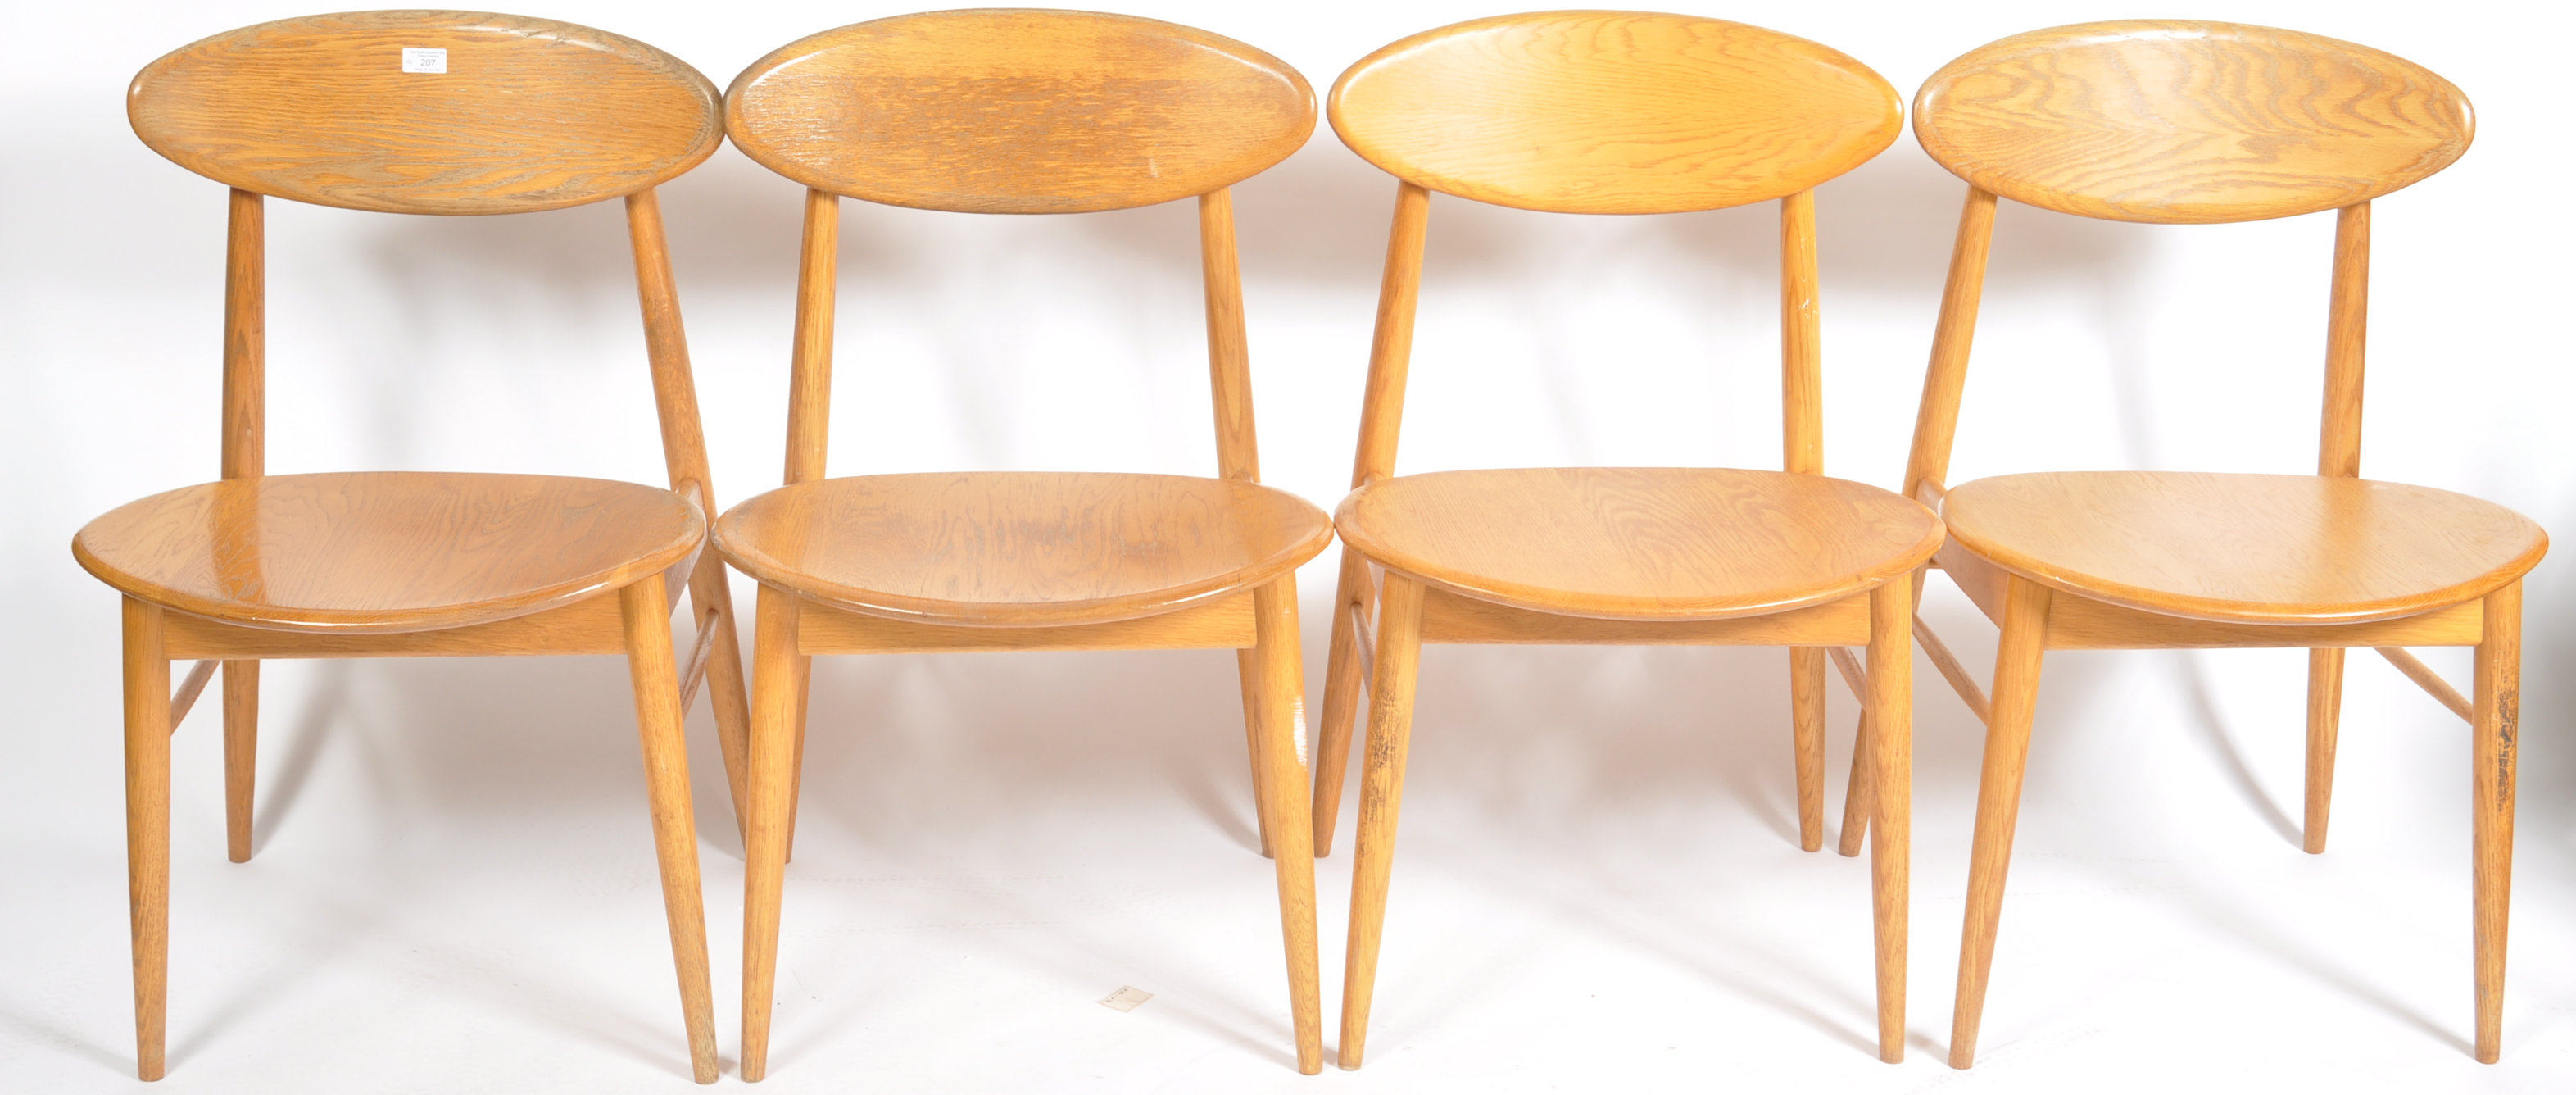 SET OF FOUR RETRO ELM DINING CHAIRS / SIDE CHAIRS - Image 2 of 8